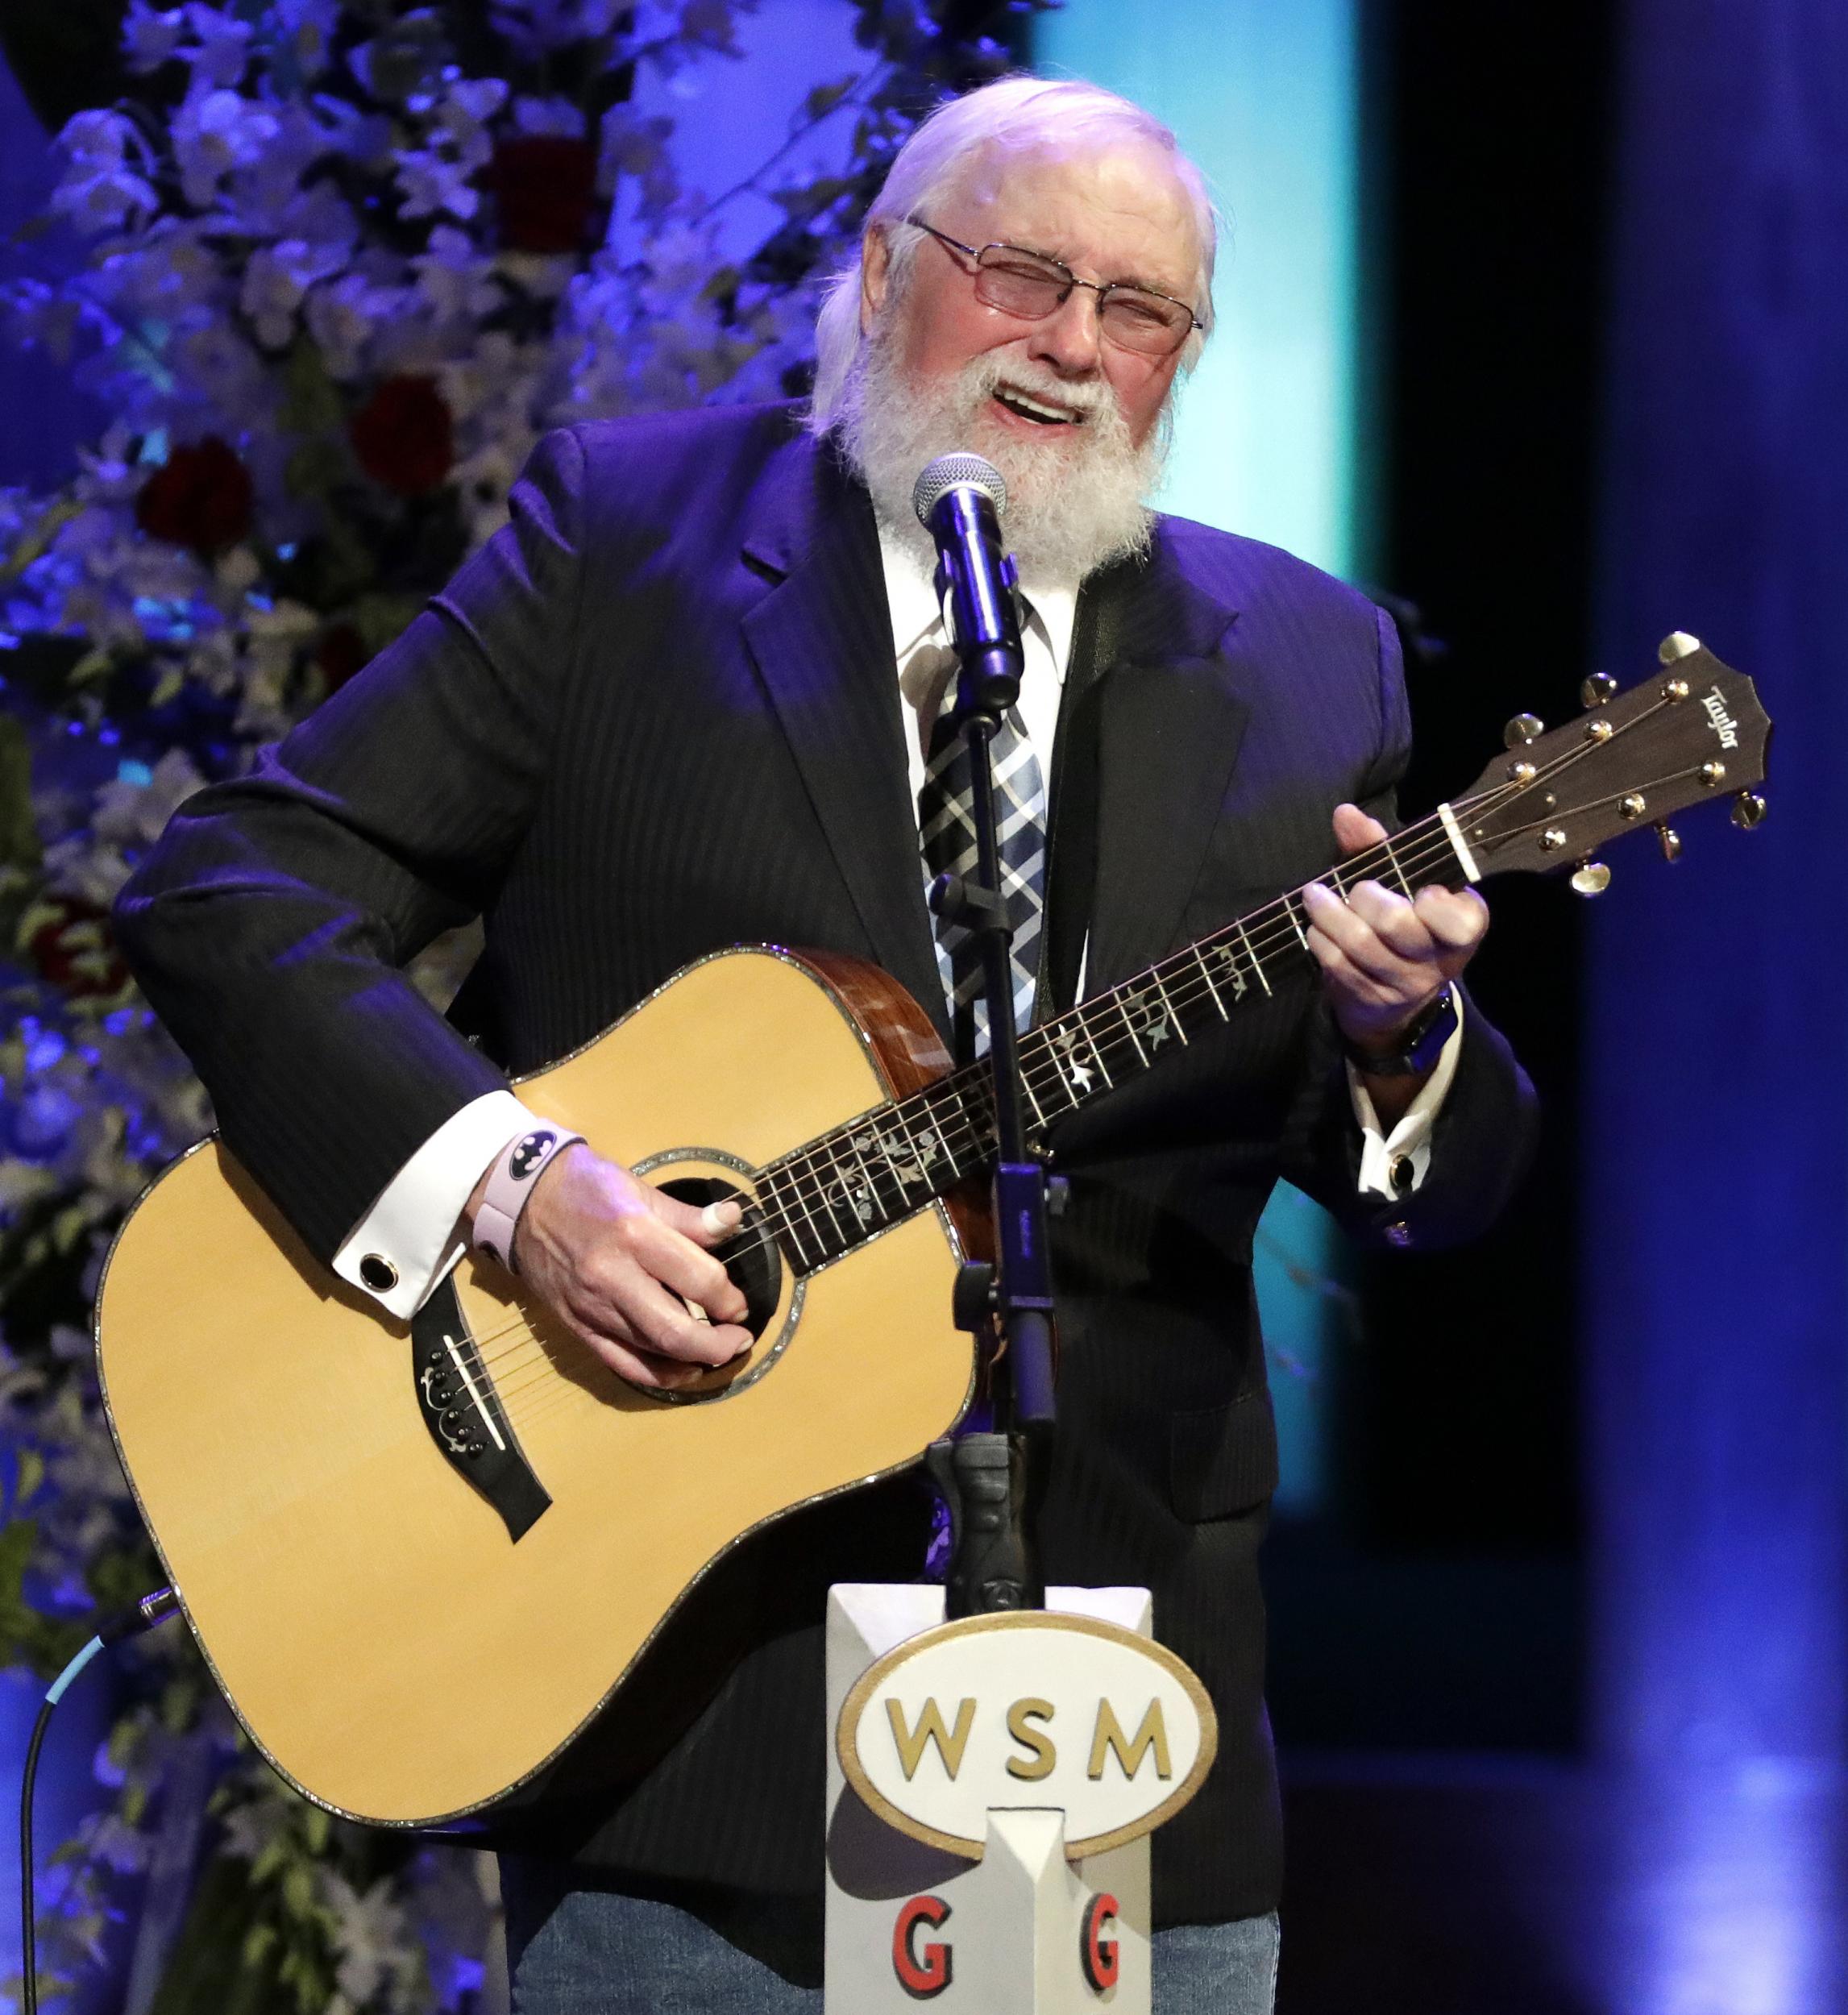 Charlie Daniels performs during a memorial service for country music singer Troy Gentry at the Grand Ole Opry House on 14 September, 2017